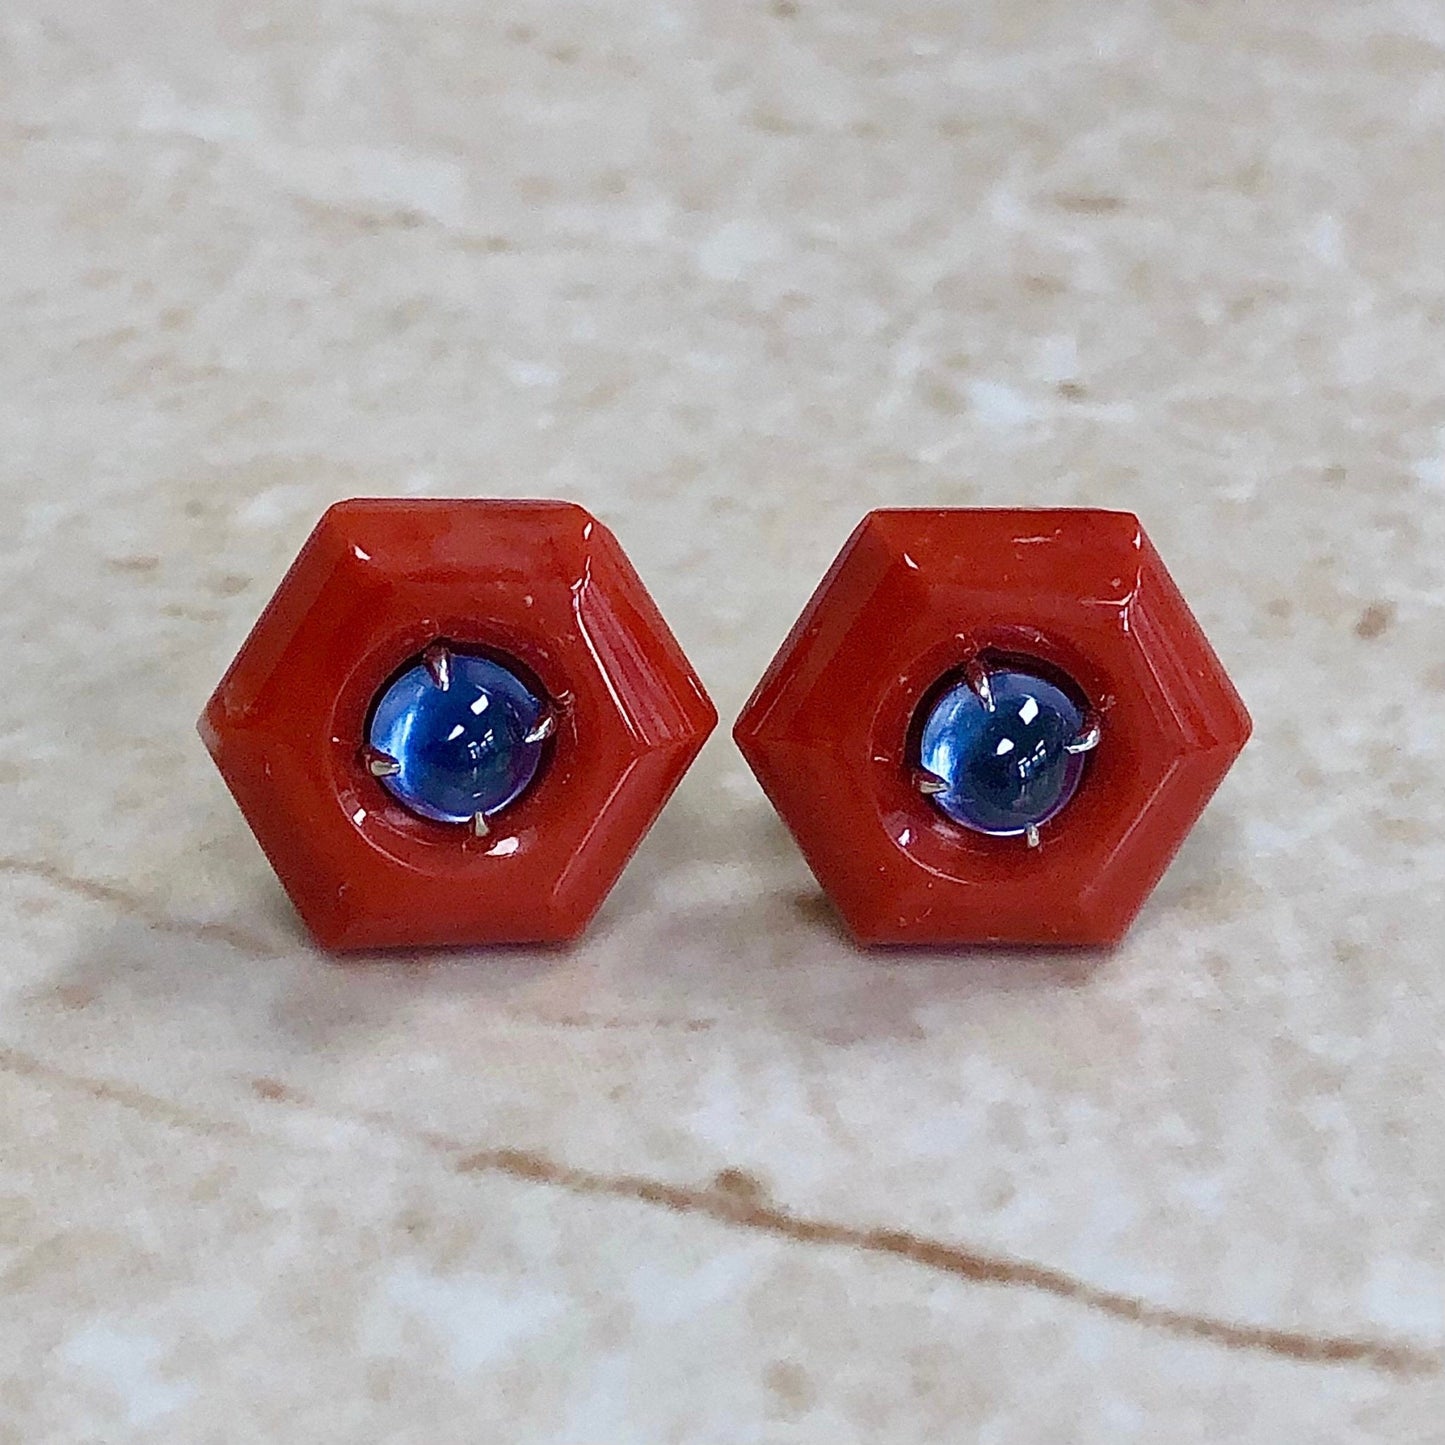 Fine 18 Karat Yellow Gold Untreated Blue Sapphire & Oxblood Coral Stud Earrings By Carvin French